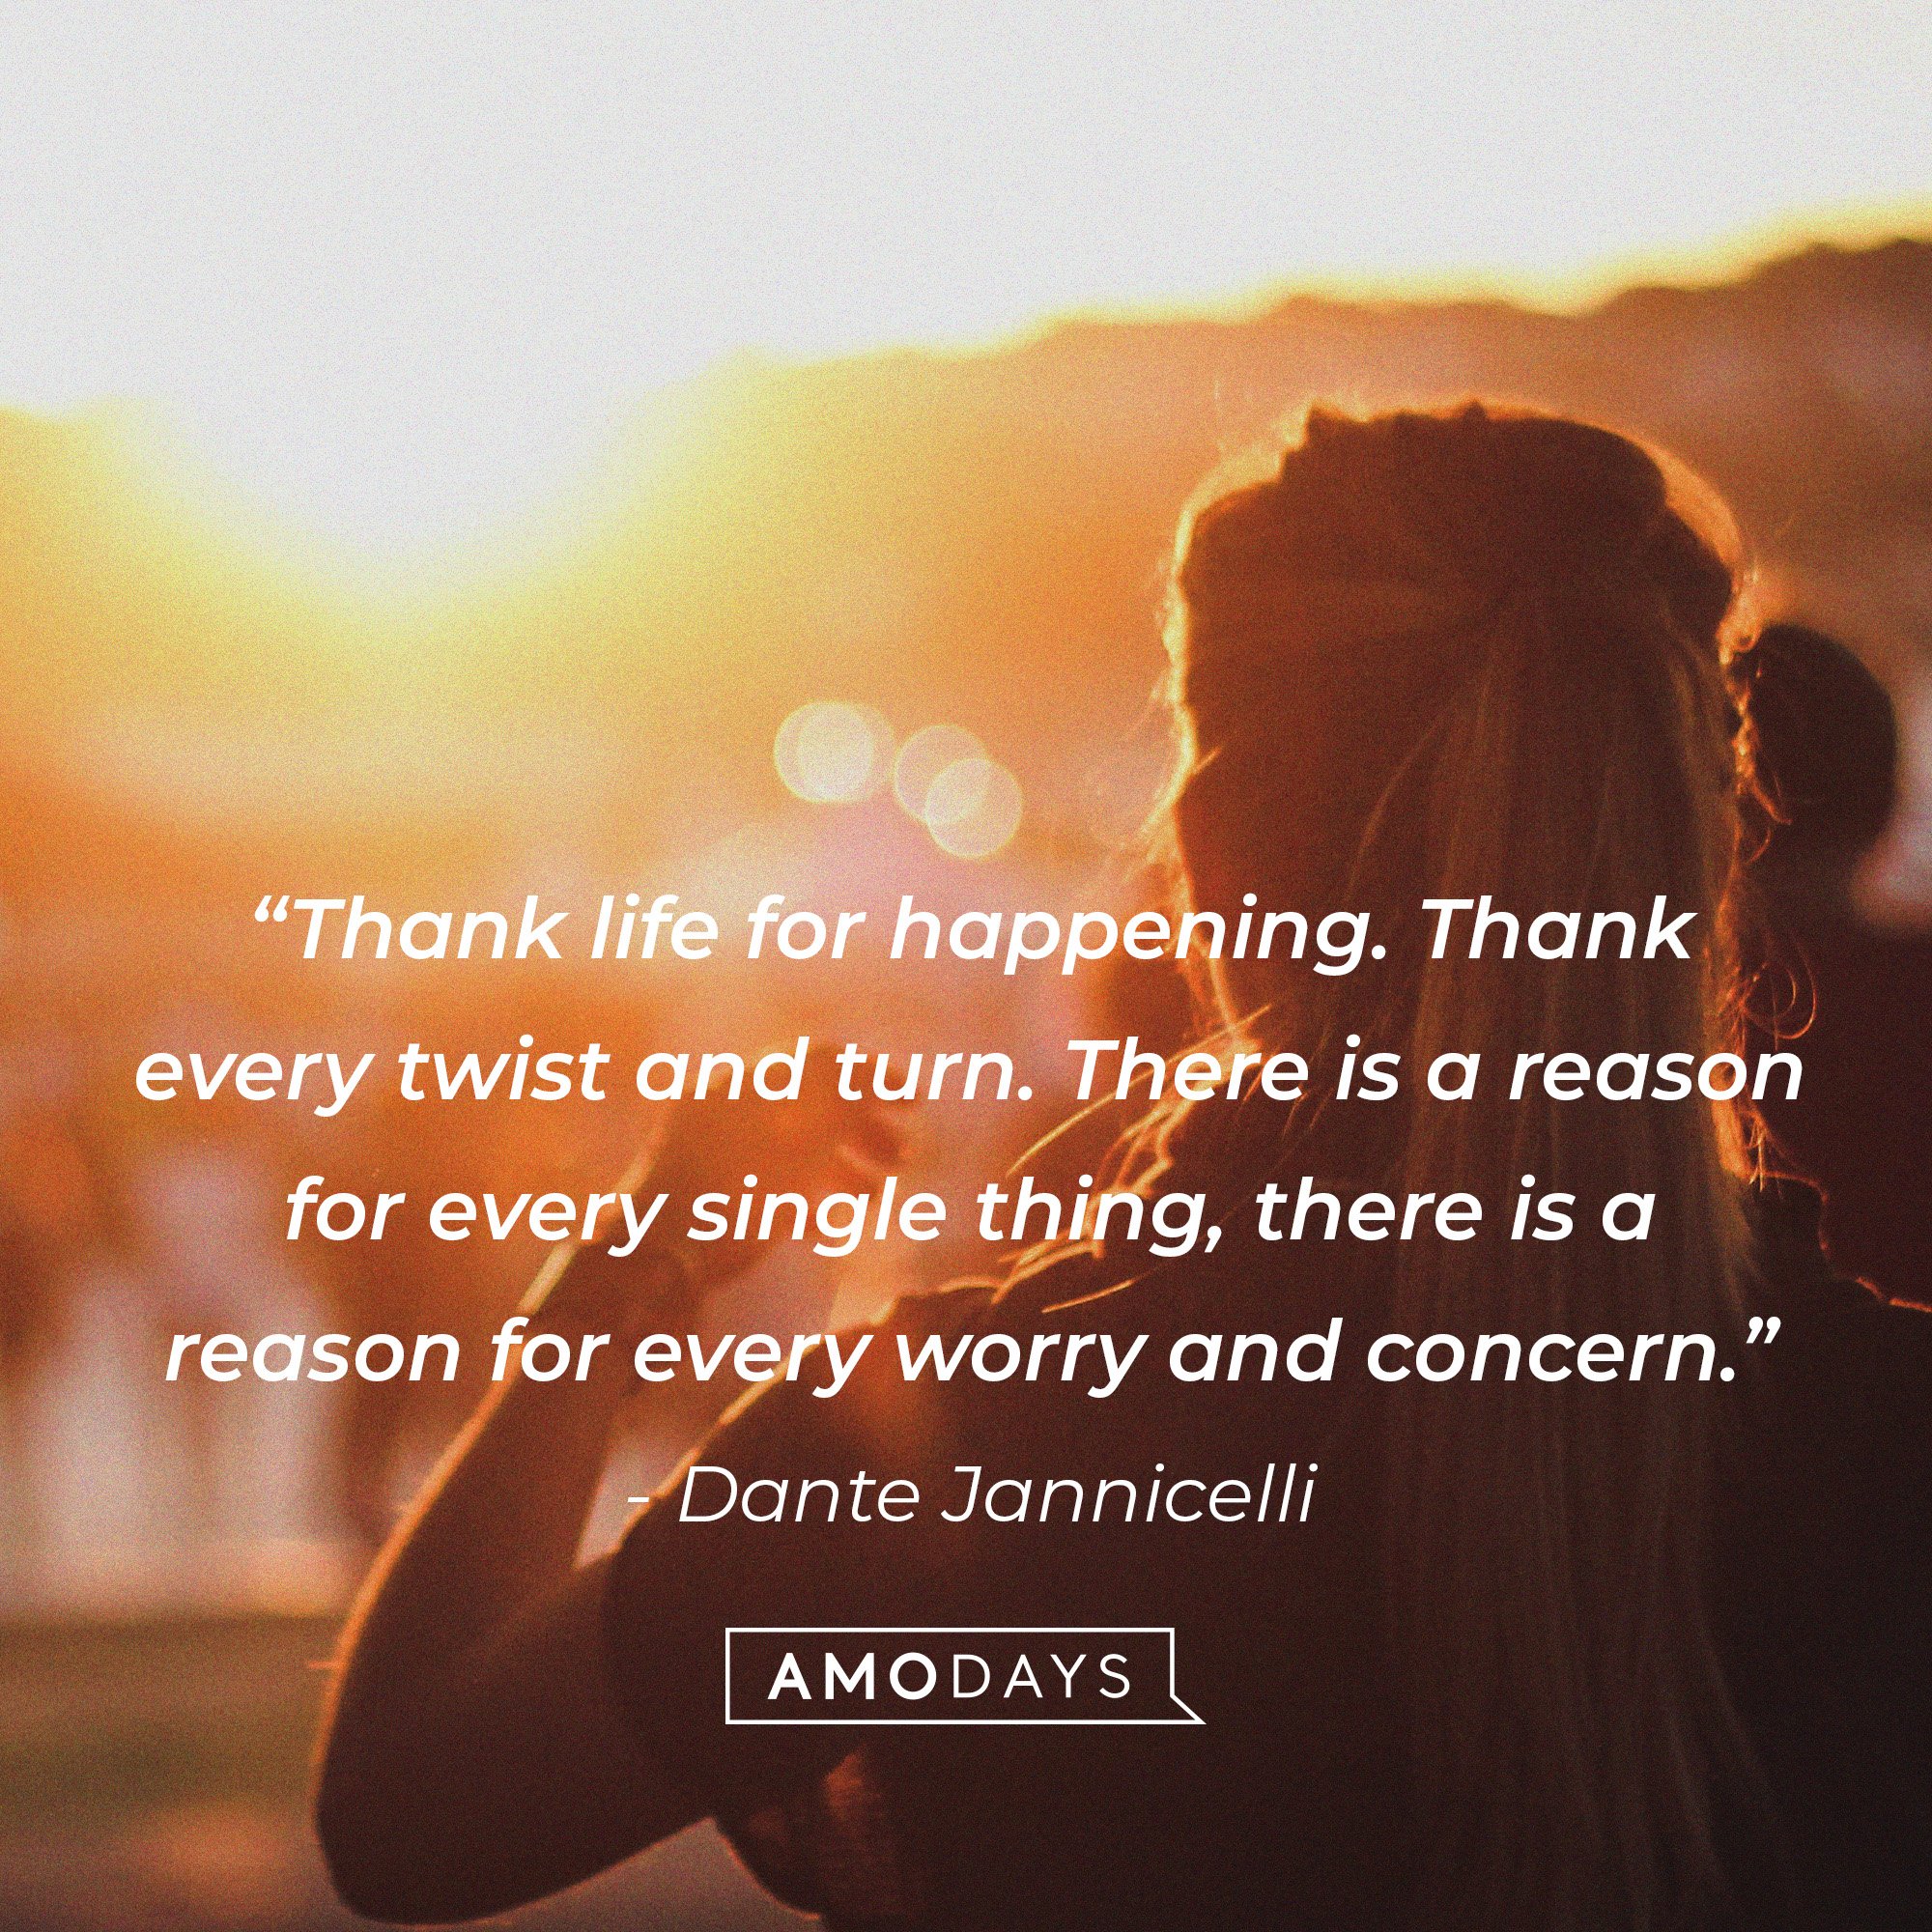 Dante Jannicelli's quote: “Thank life for happening. Thank every twist and turn. There is a reason for every single thing, there is a reason for every worry and concern.” | Image: AmoDays